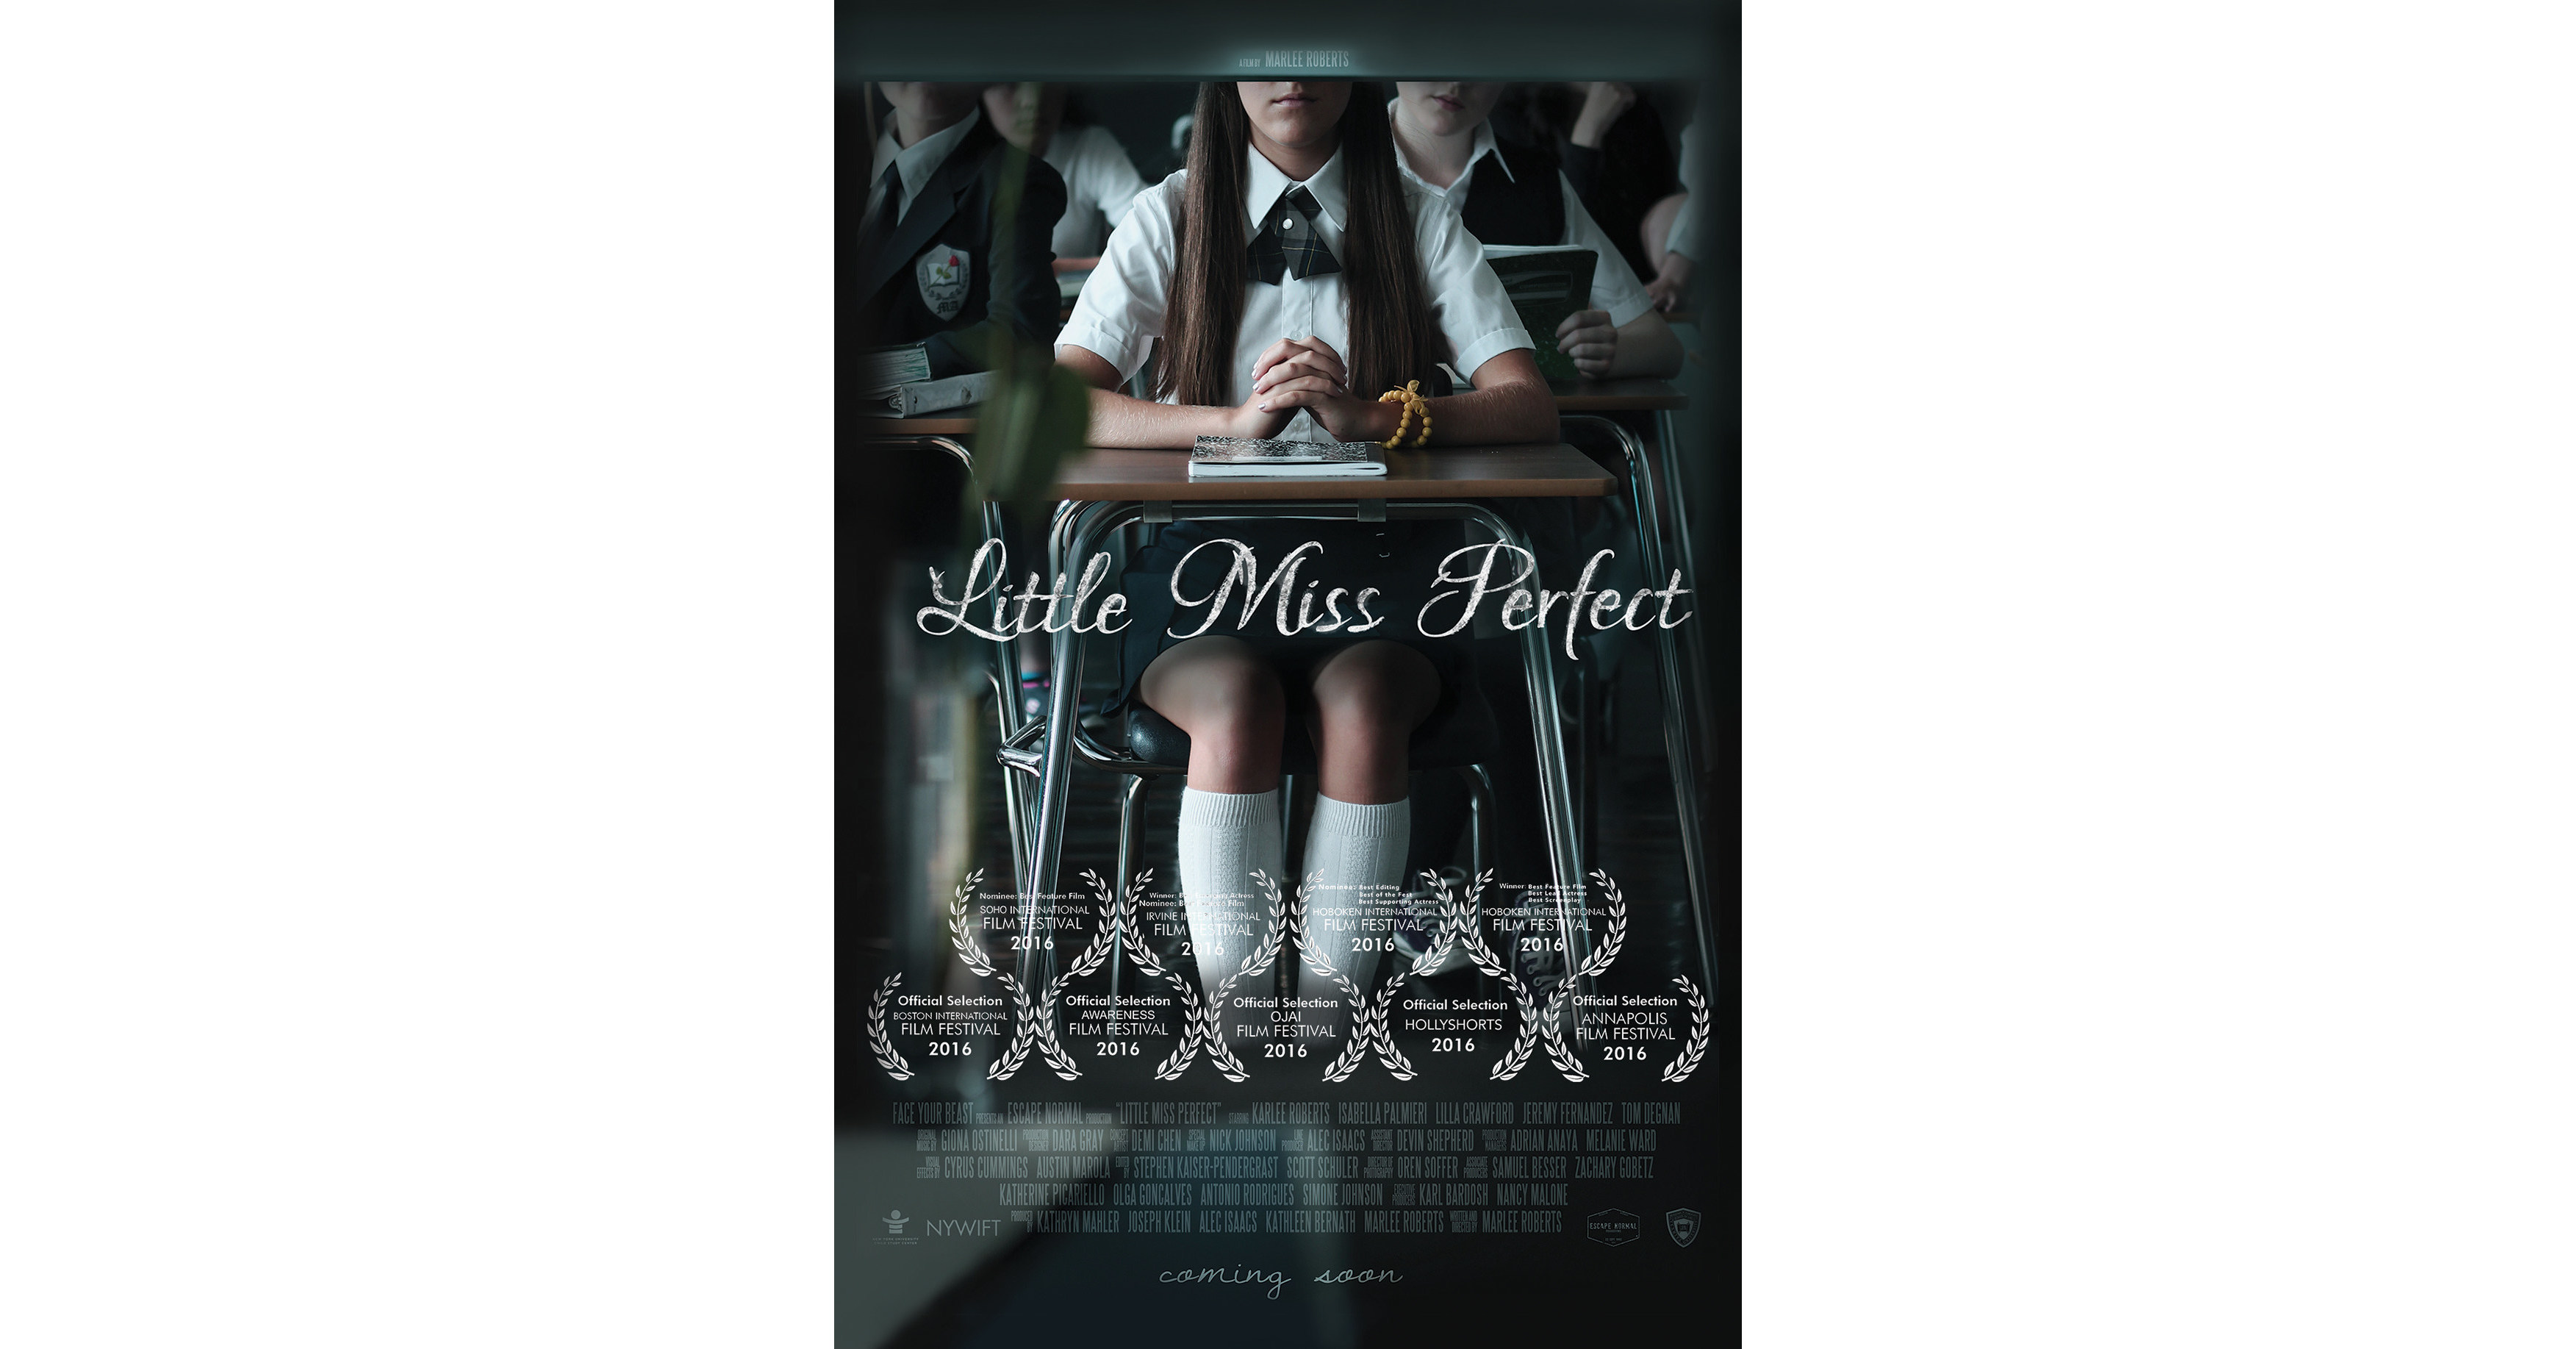  Little Miss Perfect [DVD] : Movies & TV